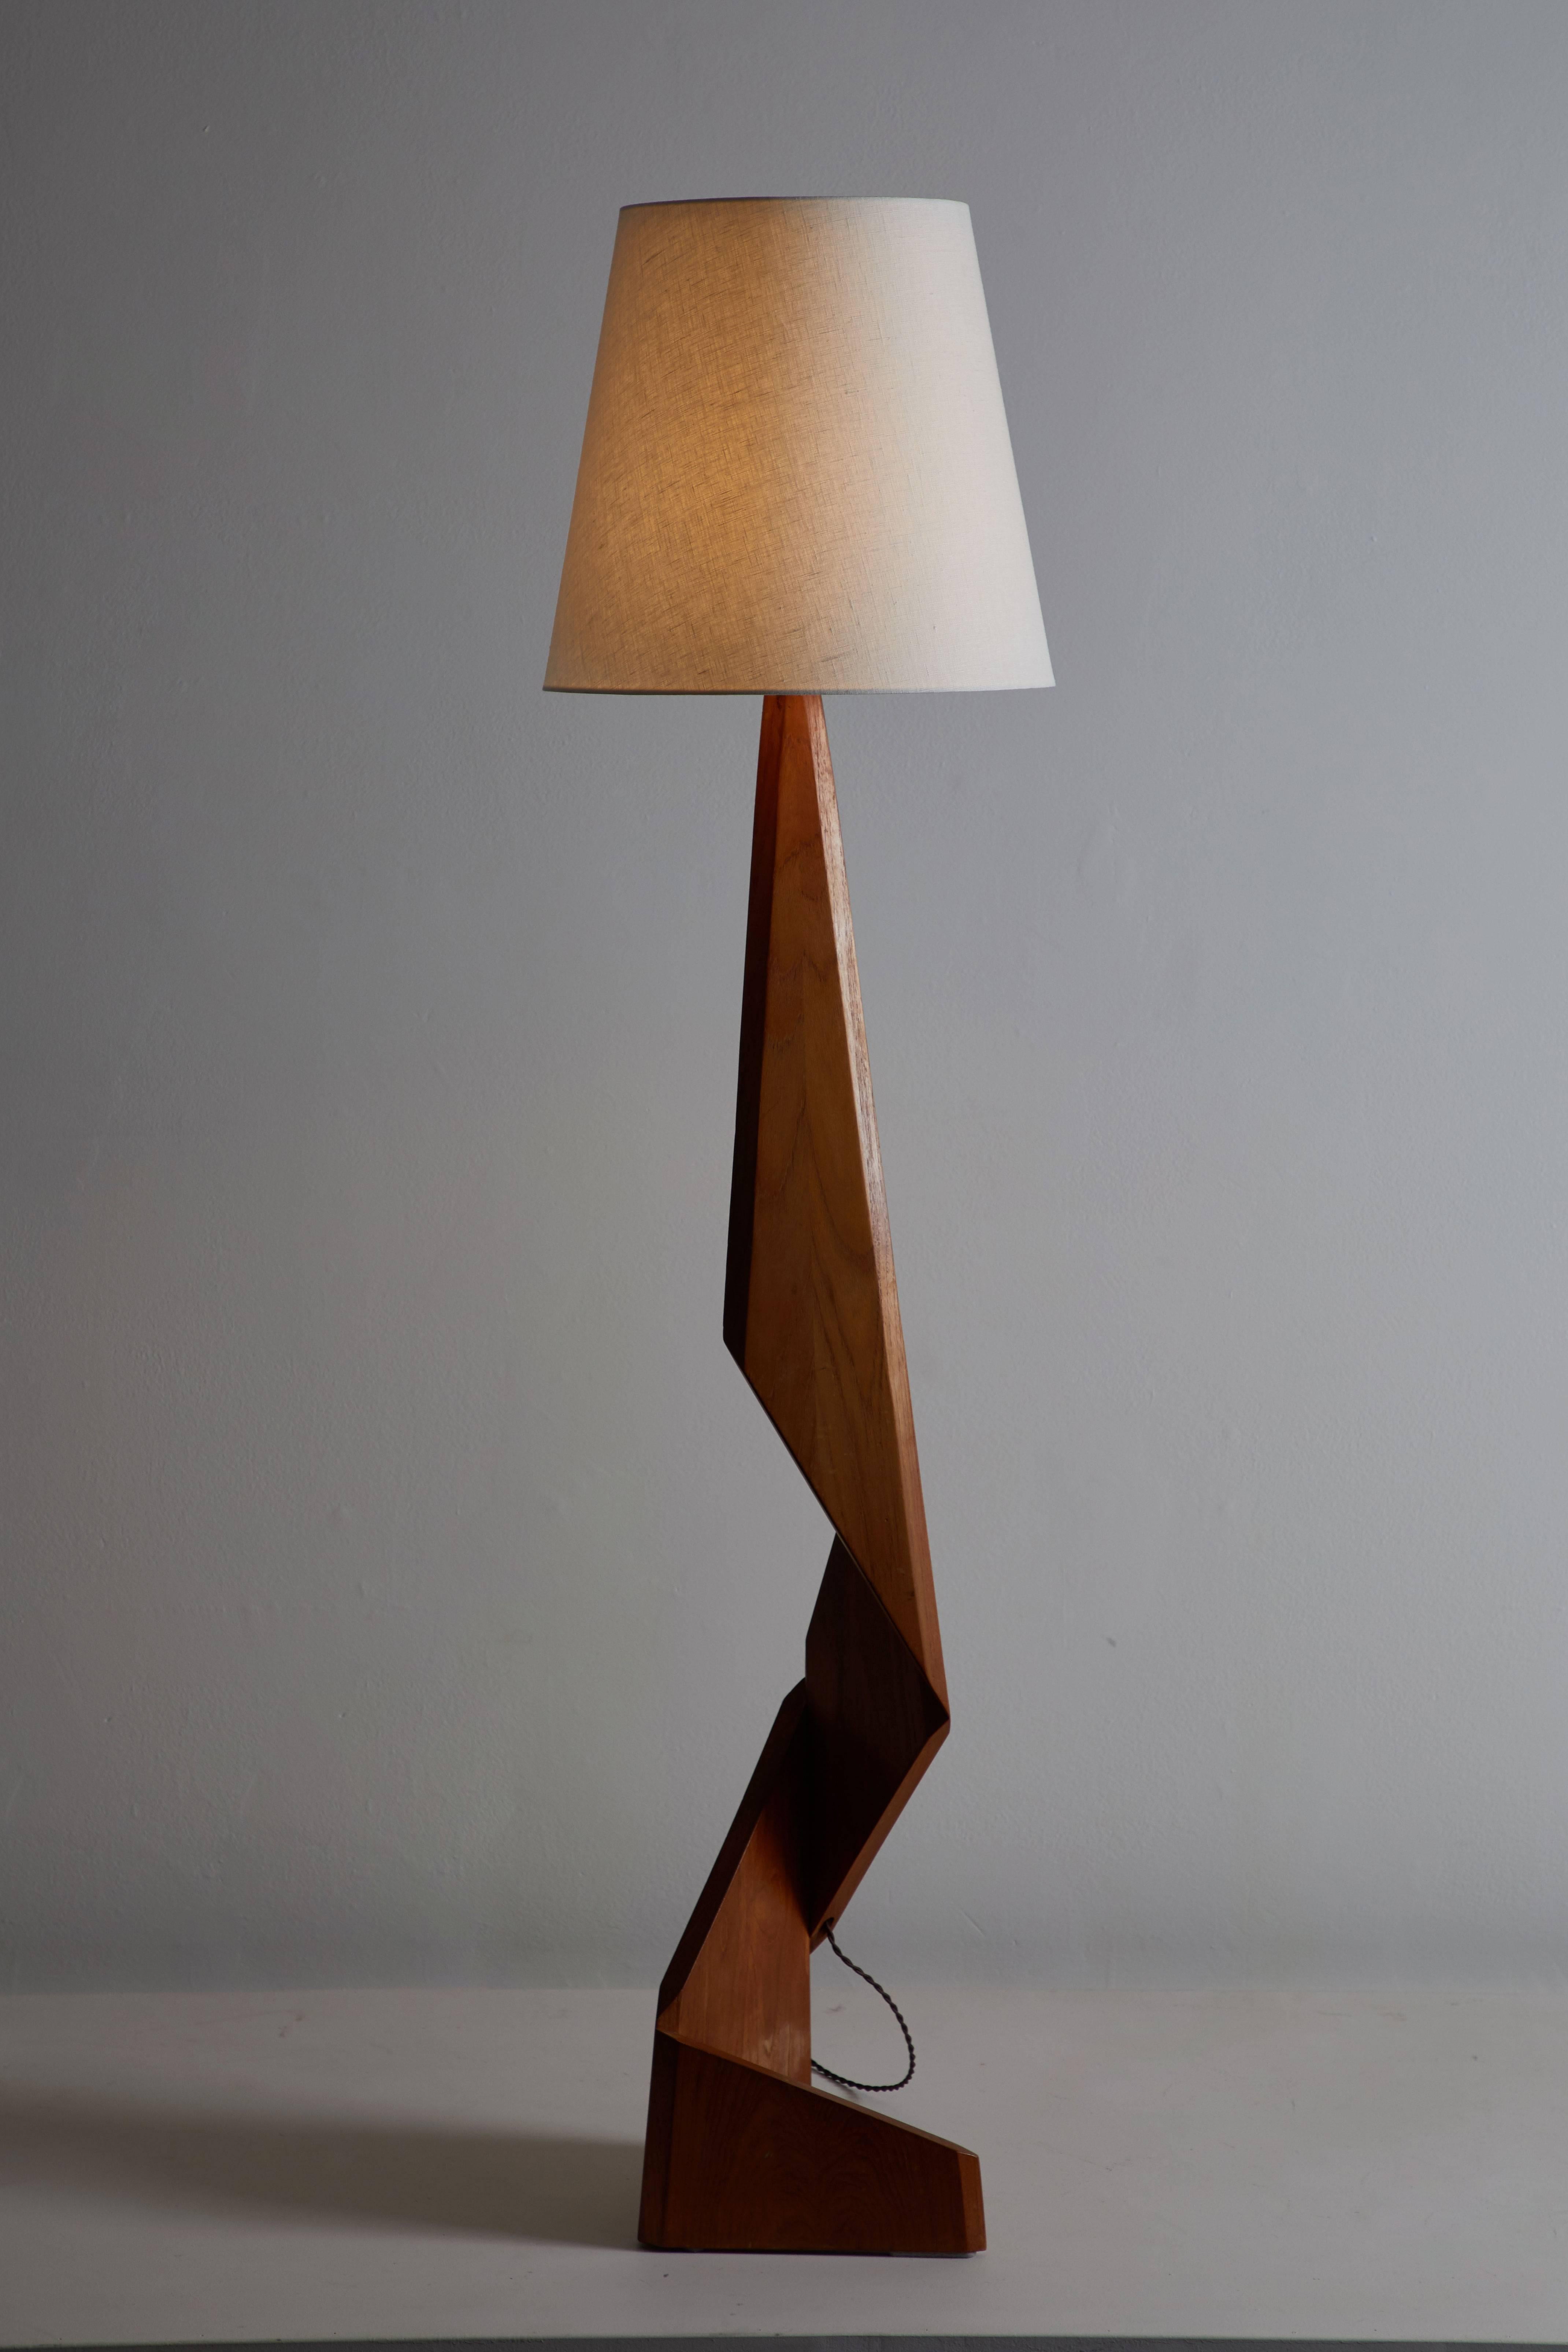 Sculptural floor lamp designed in Denmark, circa 1950s. Rewired with French twist silk cord. Teak base with linen shade. Shade is for display purposes only. Custom shade fabrication available upon request. Takes one E27 100w maximum bulb.